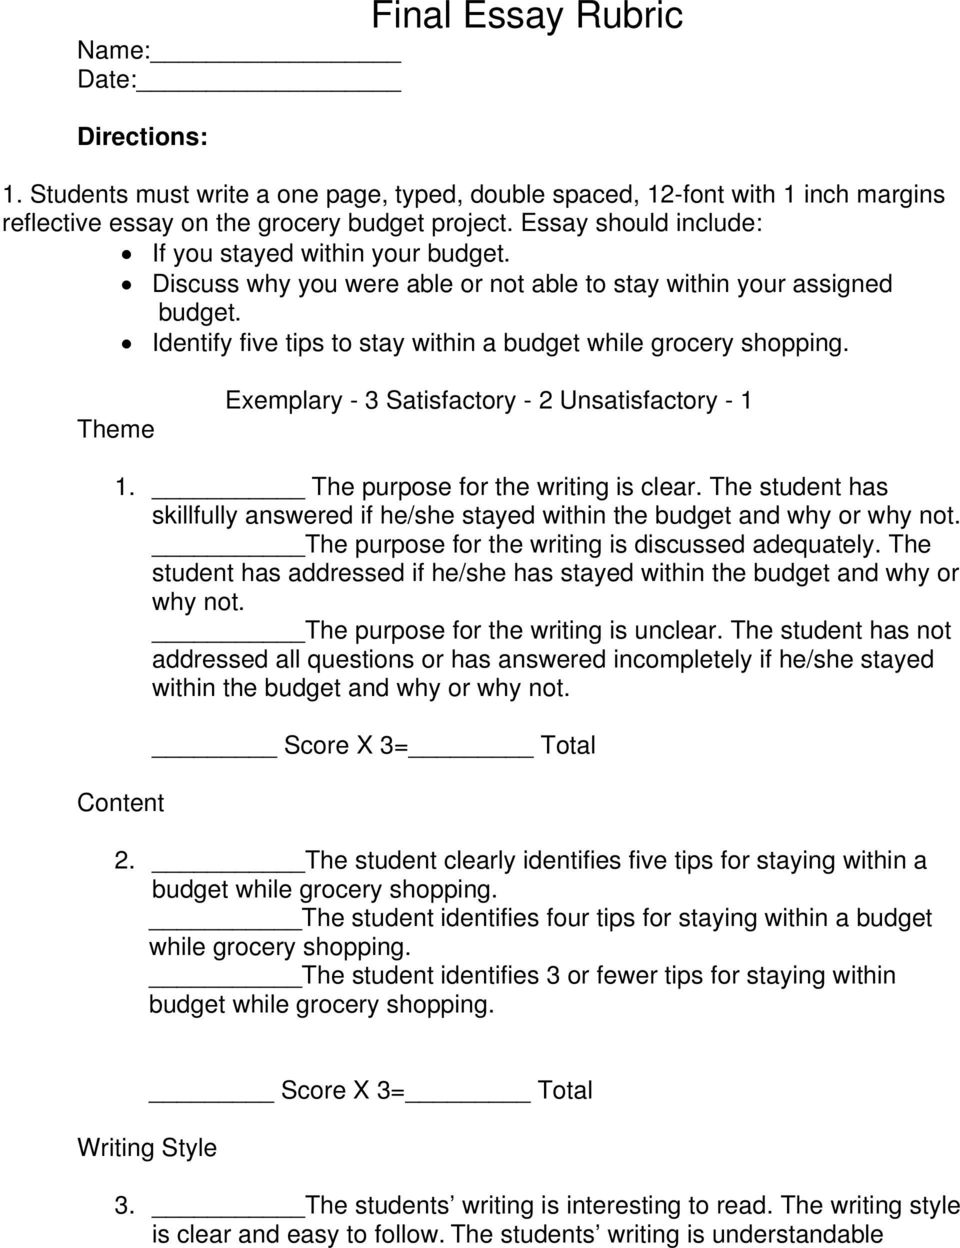 Theme Exemplary - 3 Satisfactory - 2 Unsatisfactory - 1 1. The purpose for the writing is clear. The student has skillfully answered if he/she stayed within the budget and why or why not.